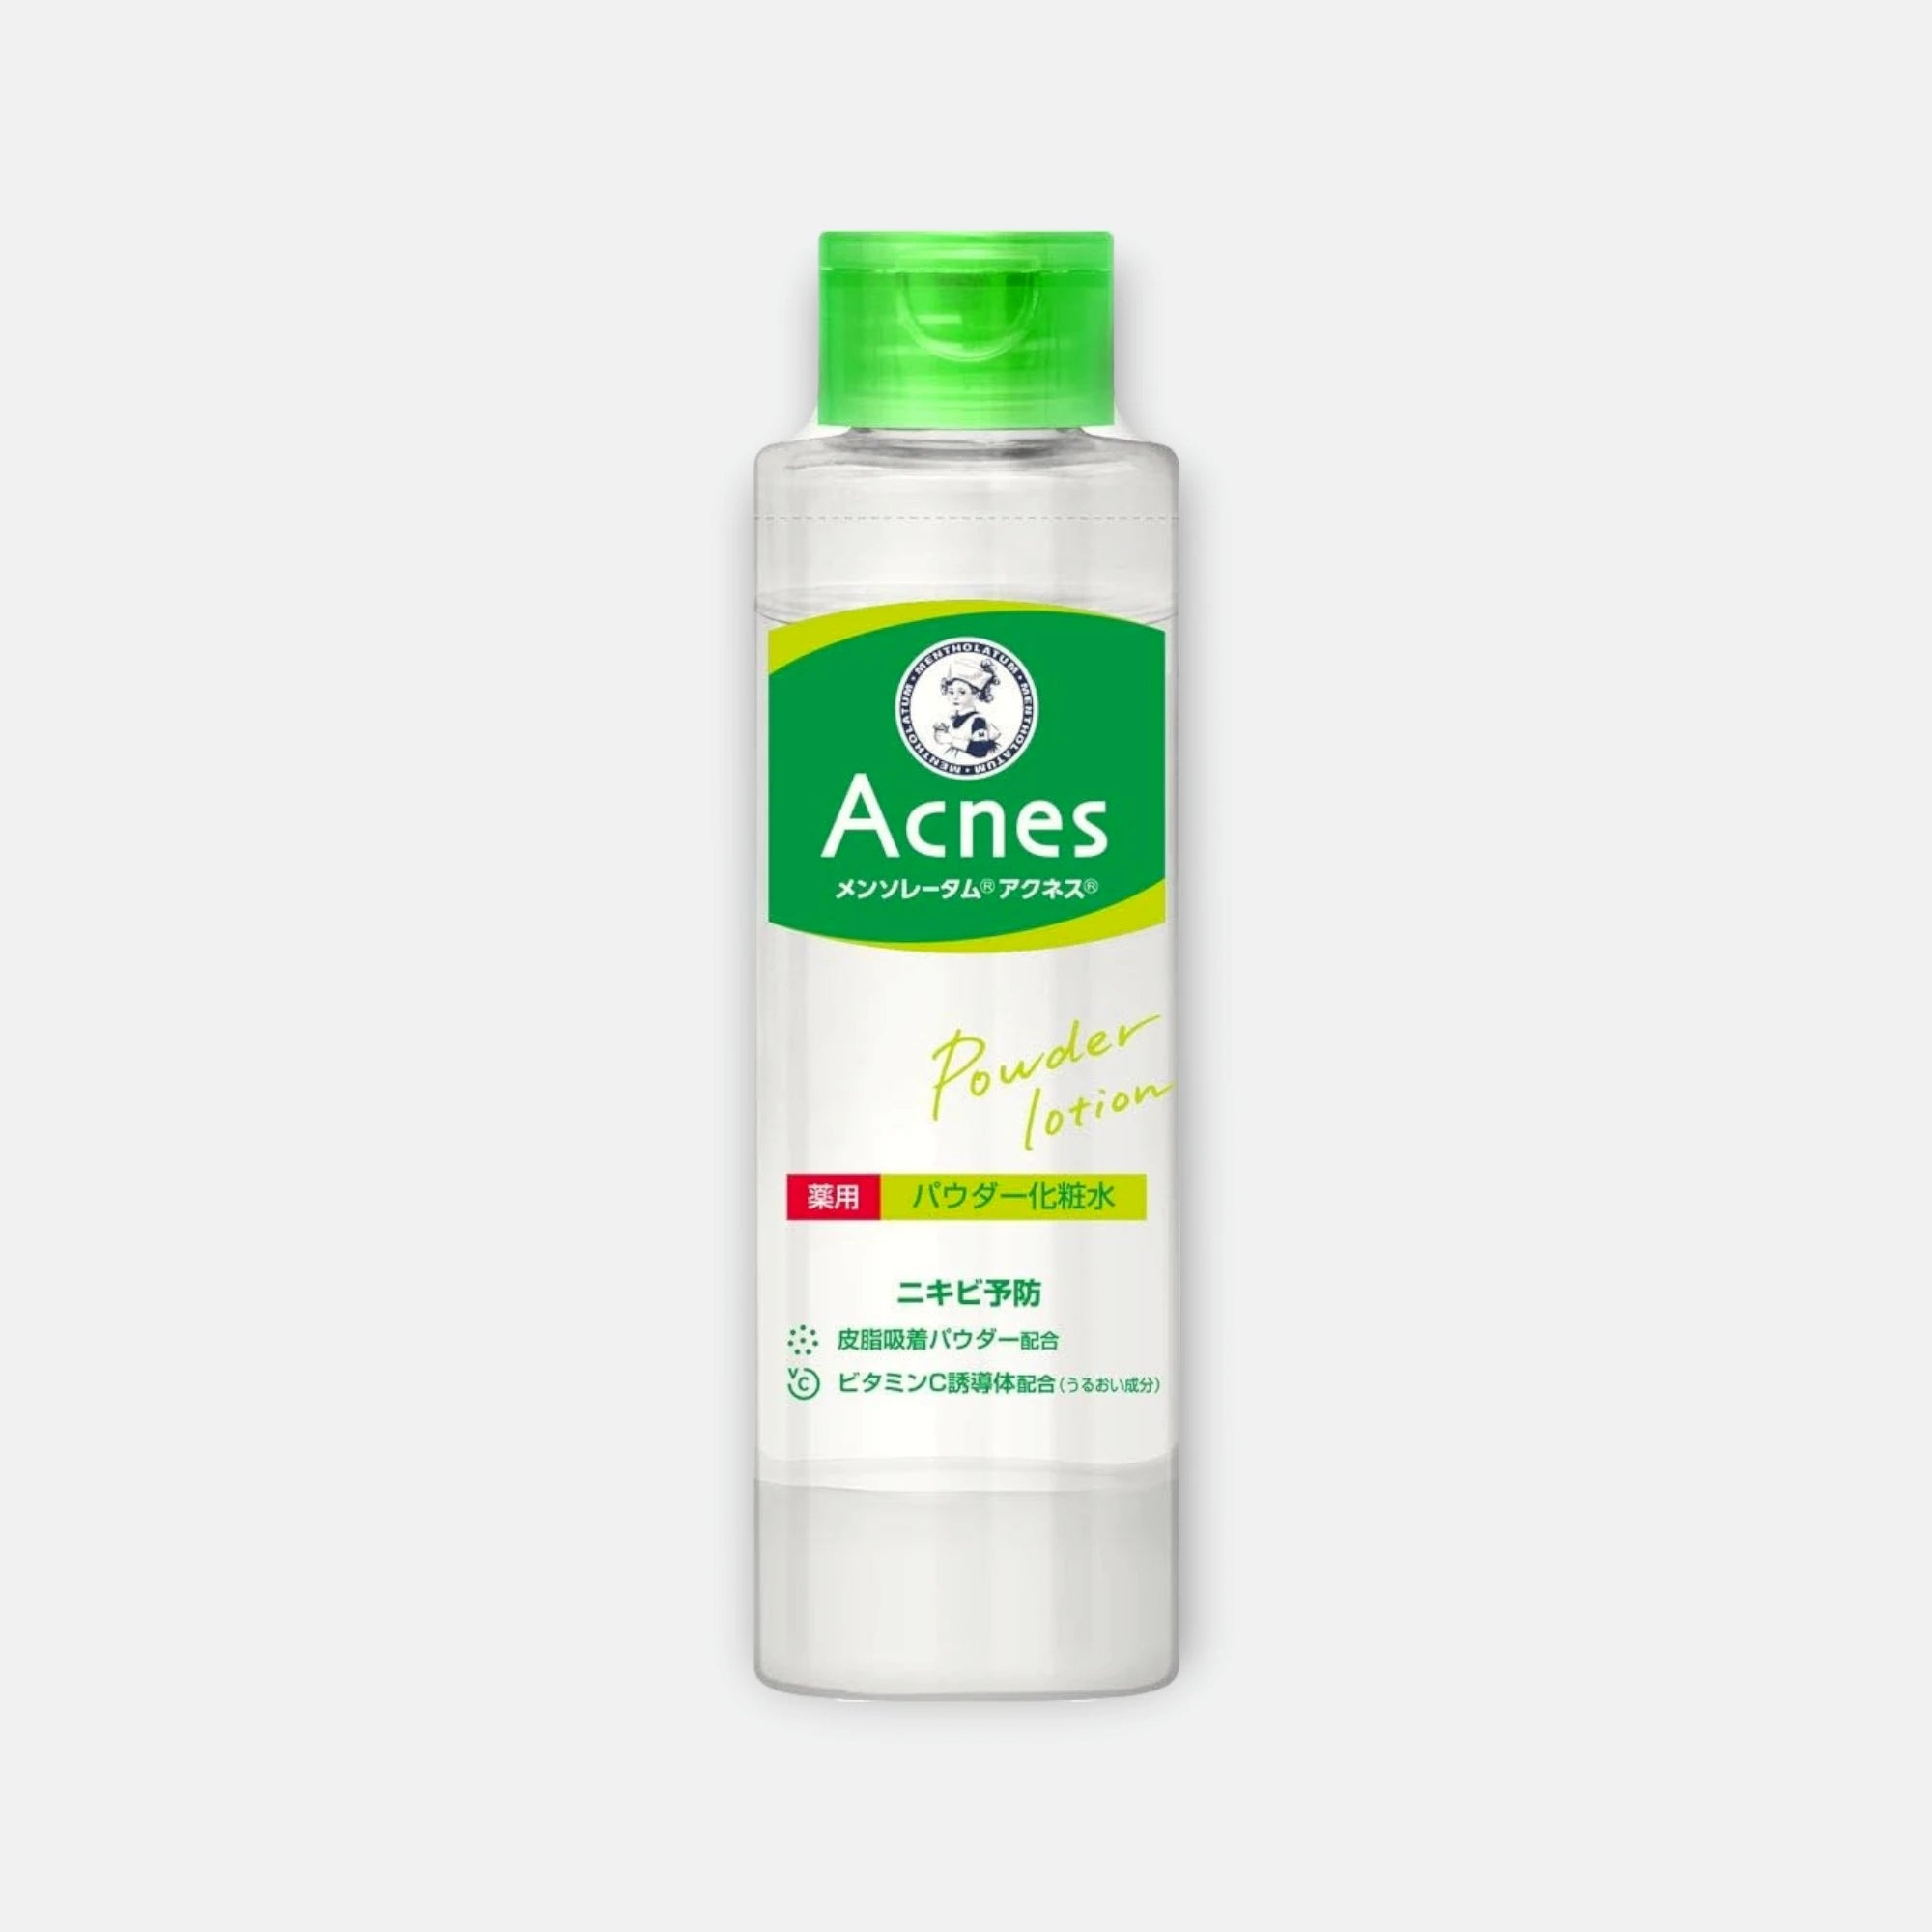 Acnes Medicated Powder Lotion 180ml